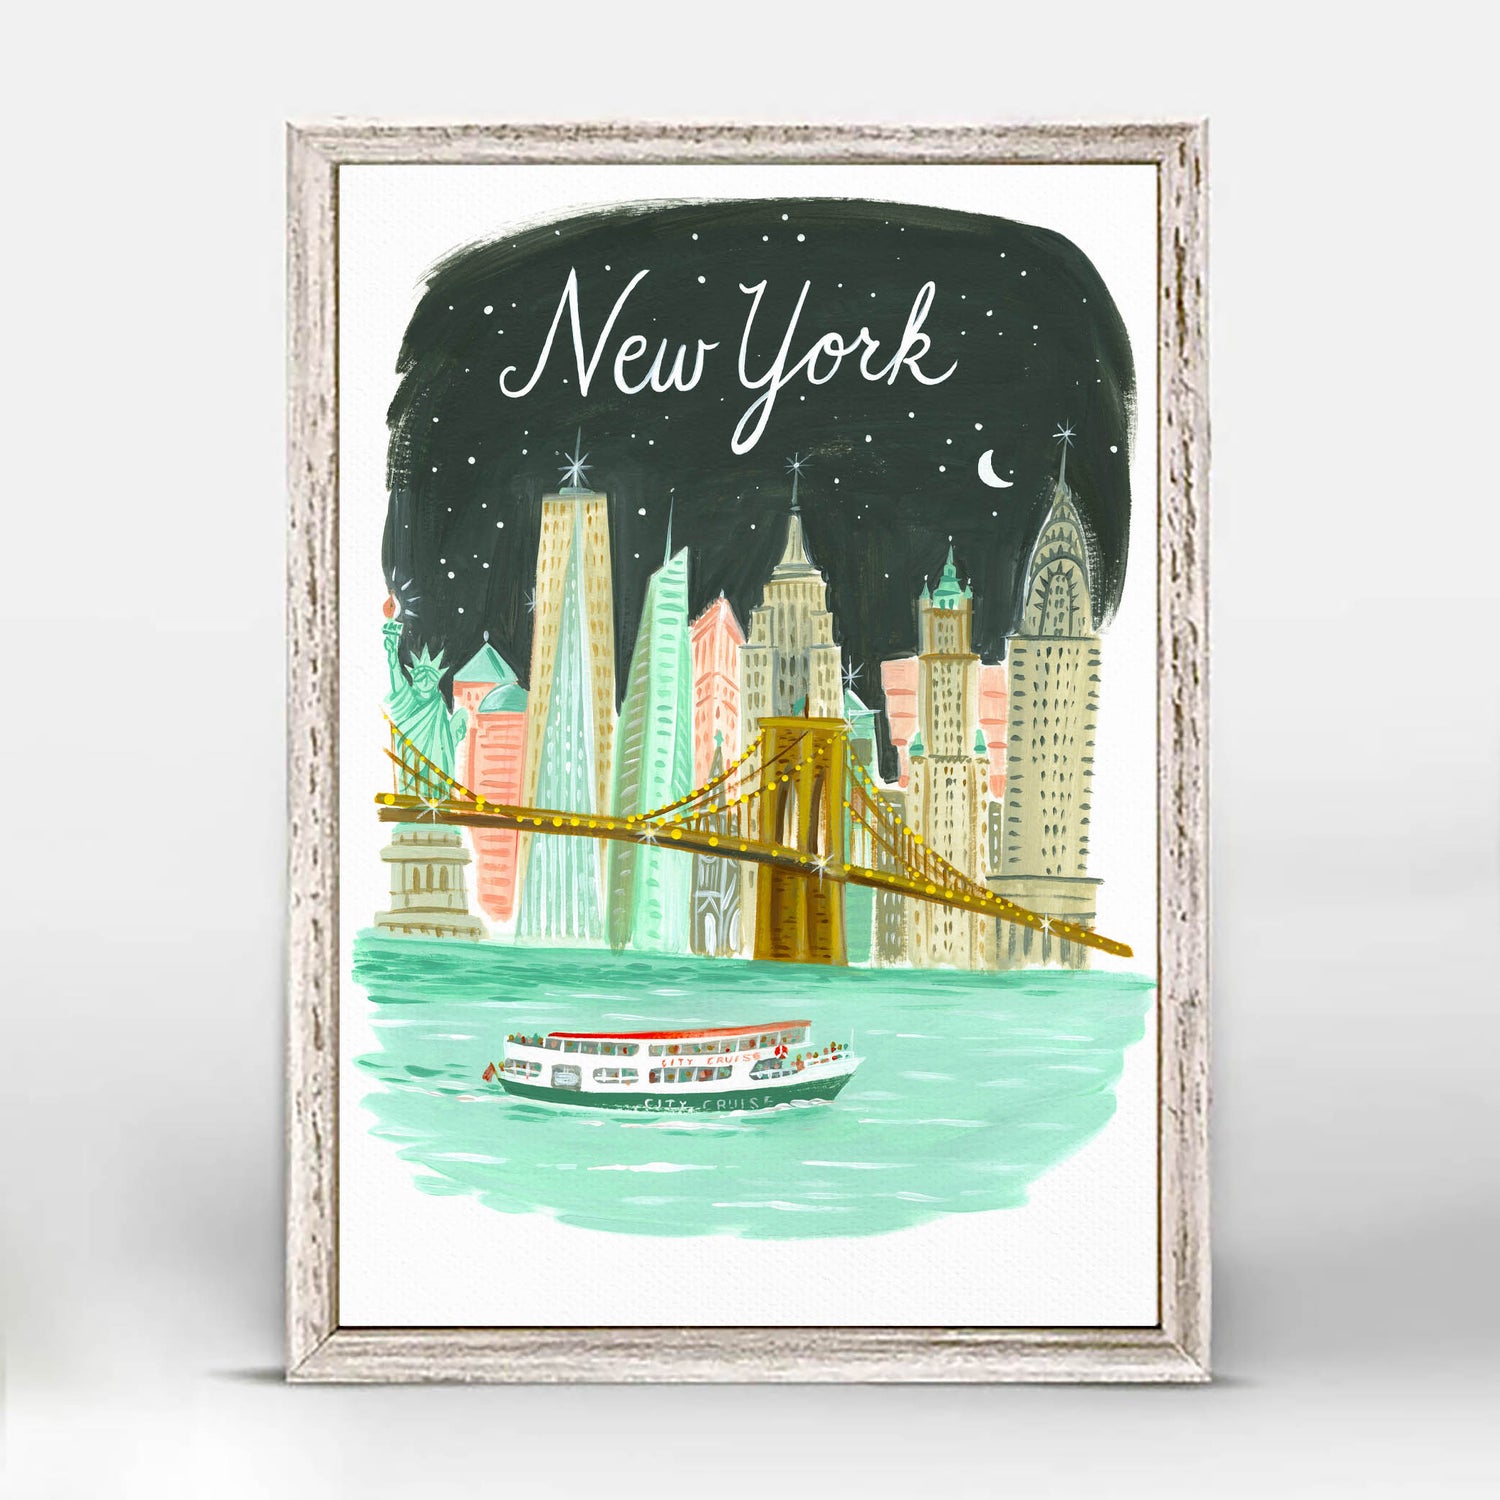 New York City Skyline art with Brooklyn Bridge, city lights, Statue of Liberty, and East River; trendy illustration by Angela Staehling